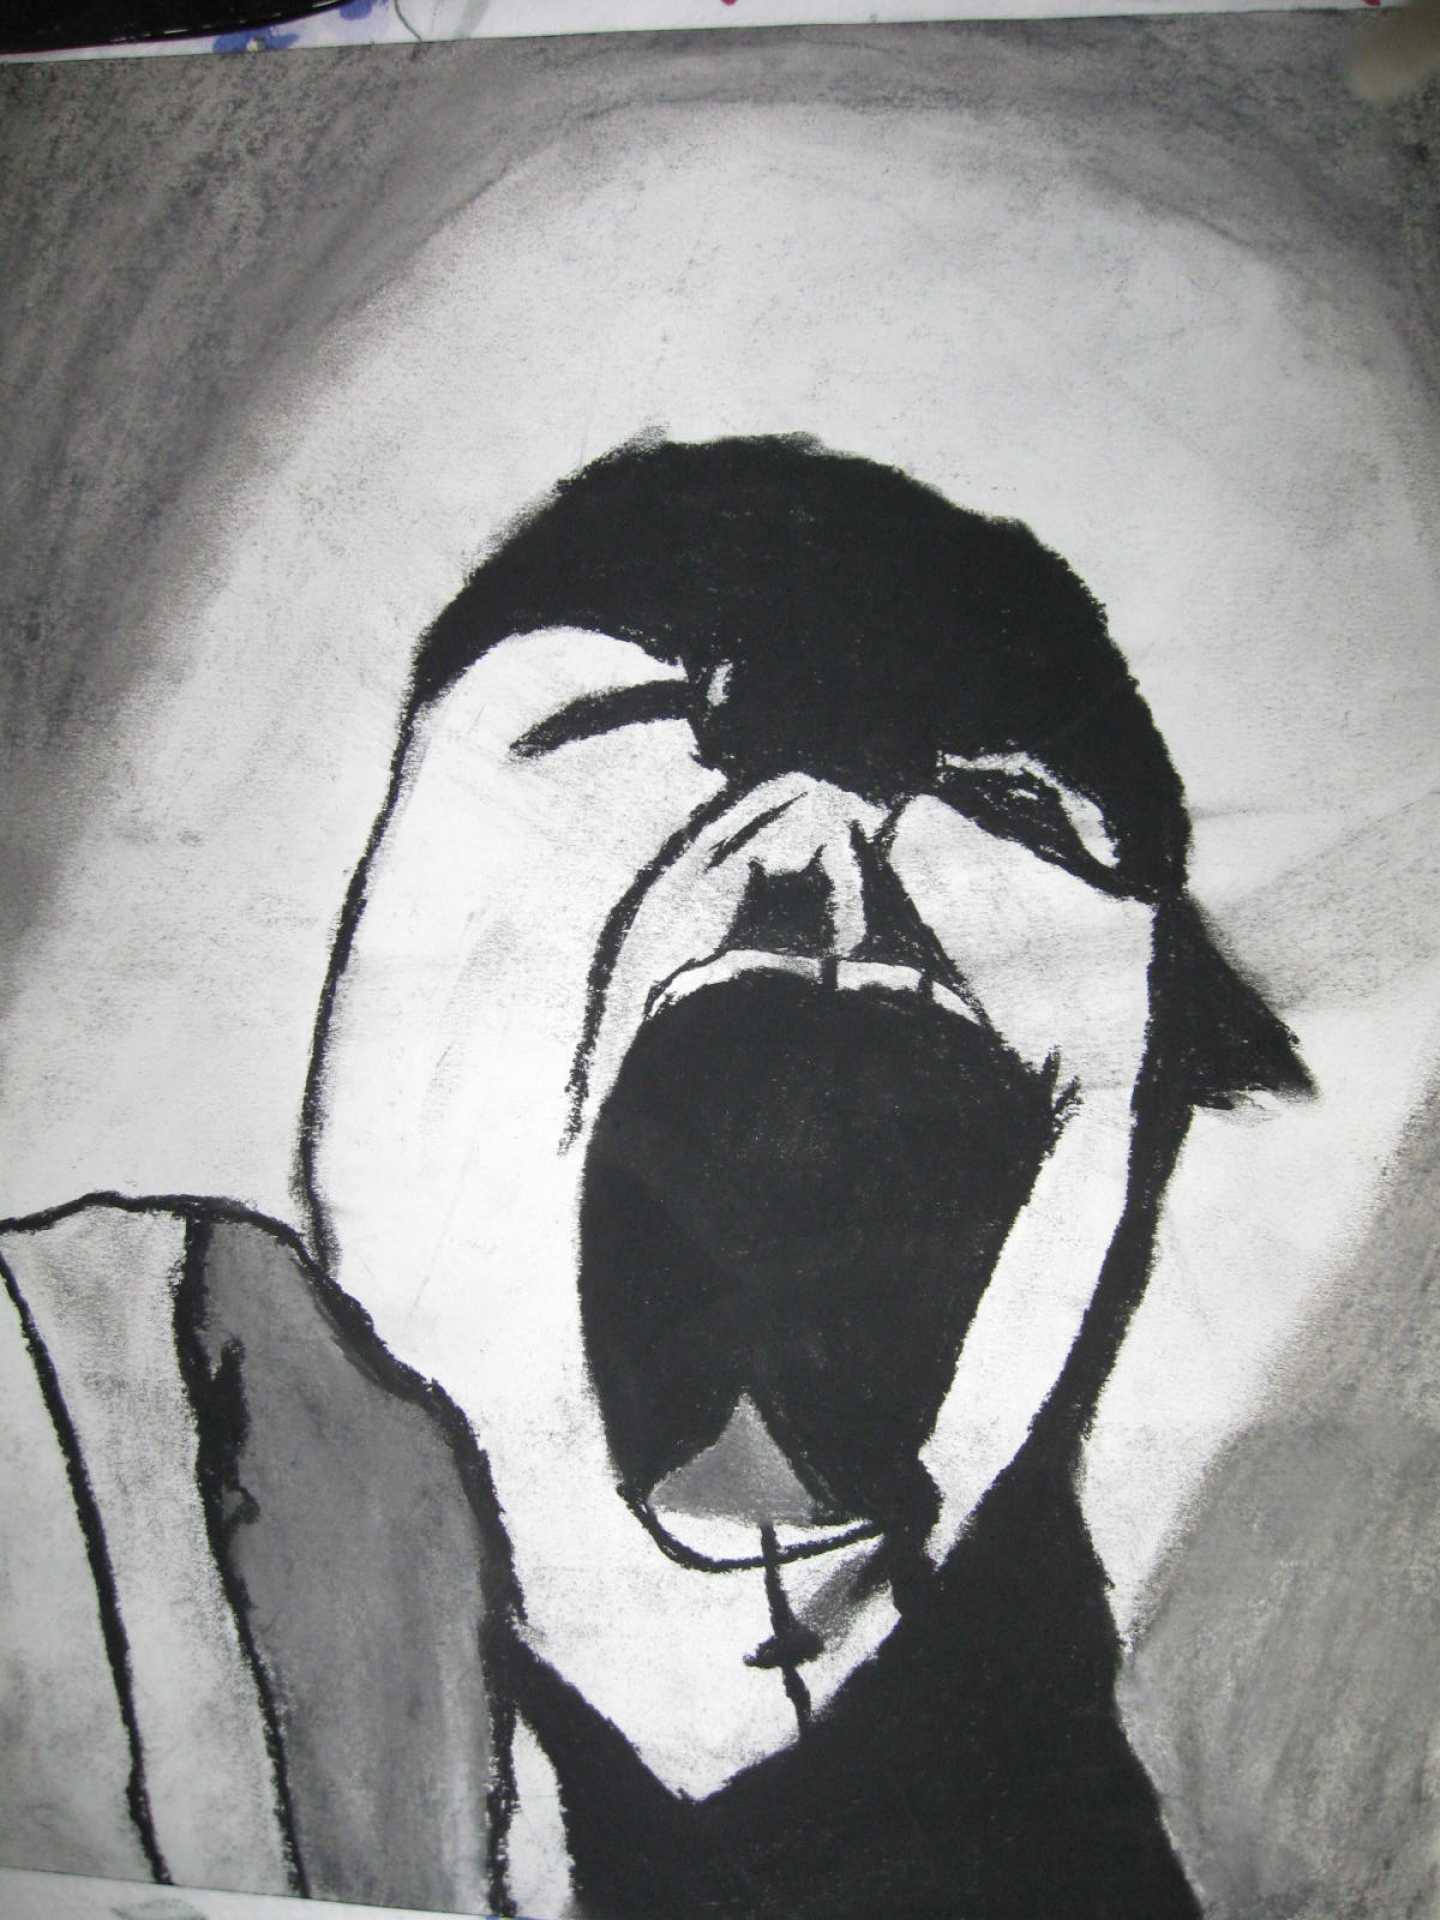 Art Picture, Pink Floyd The Wall. Charcoal. German Expressionism. Write a comment on my Profile or Wall if you like it. Thanks for looking.